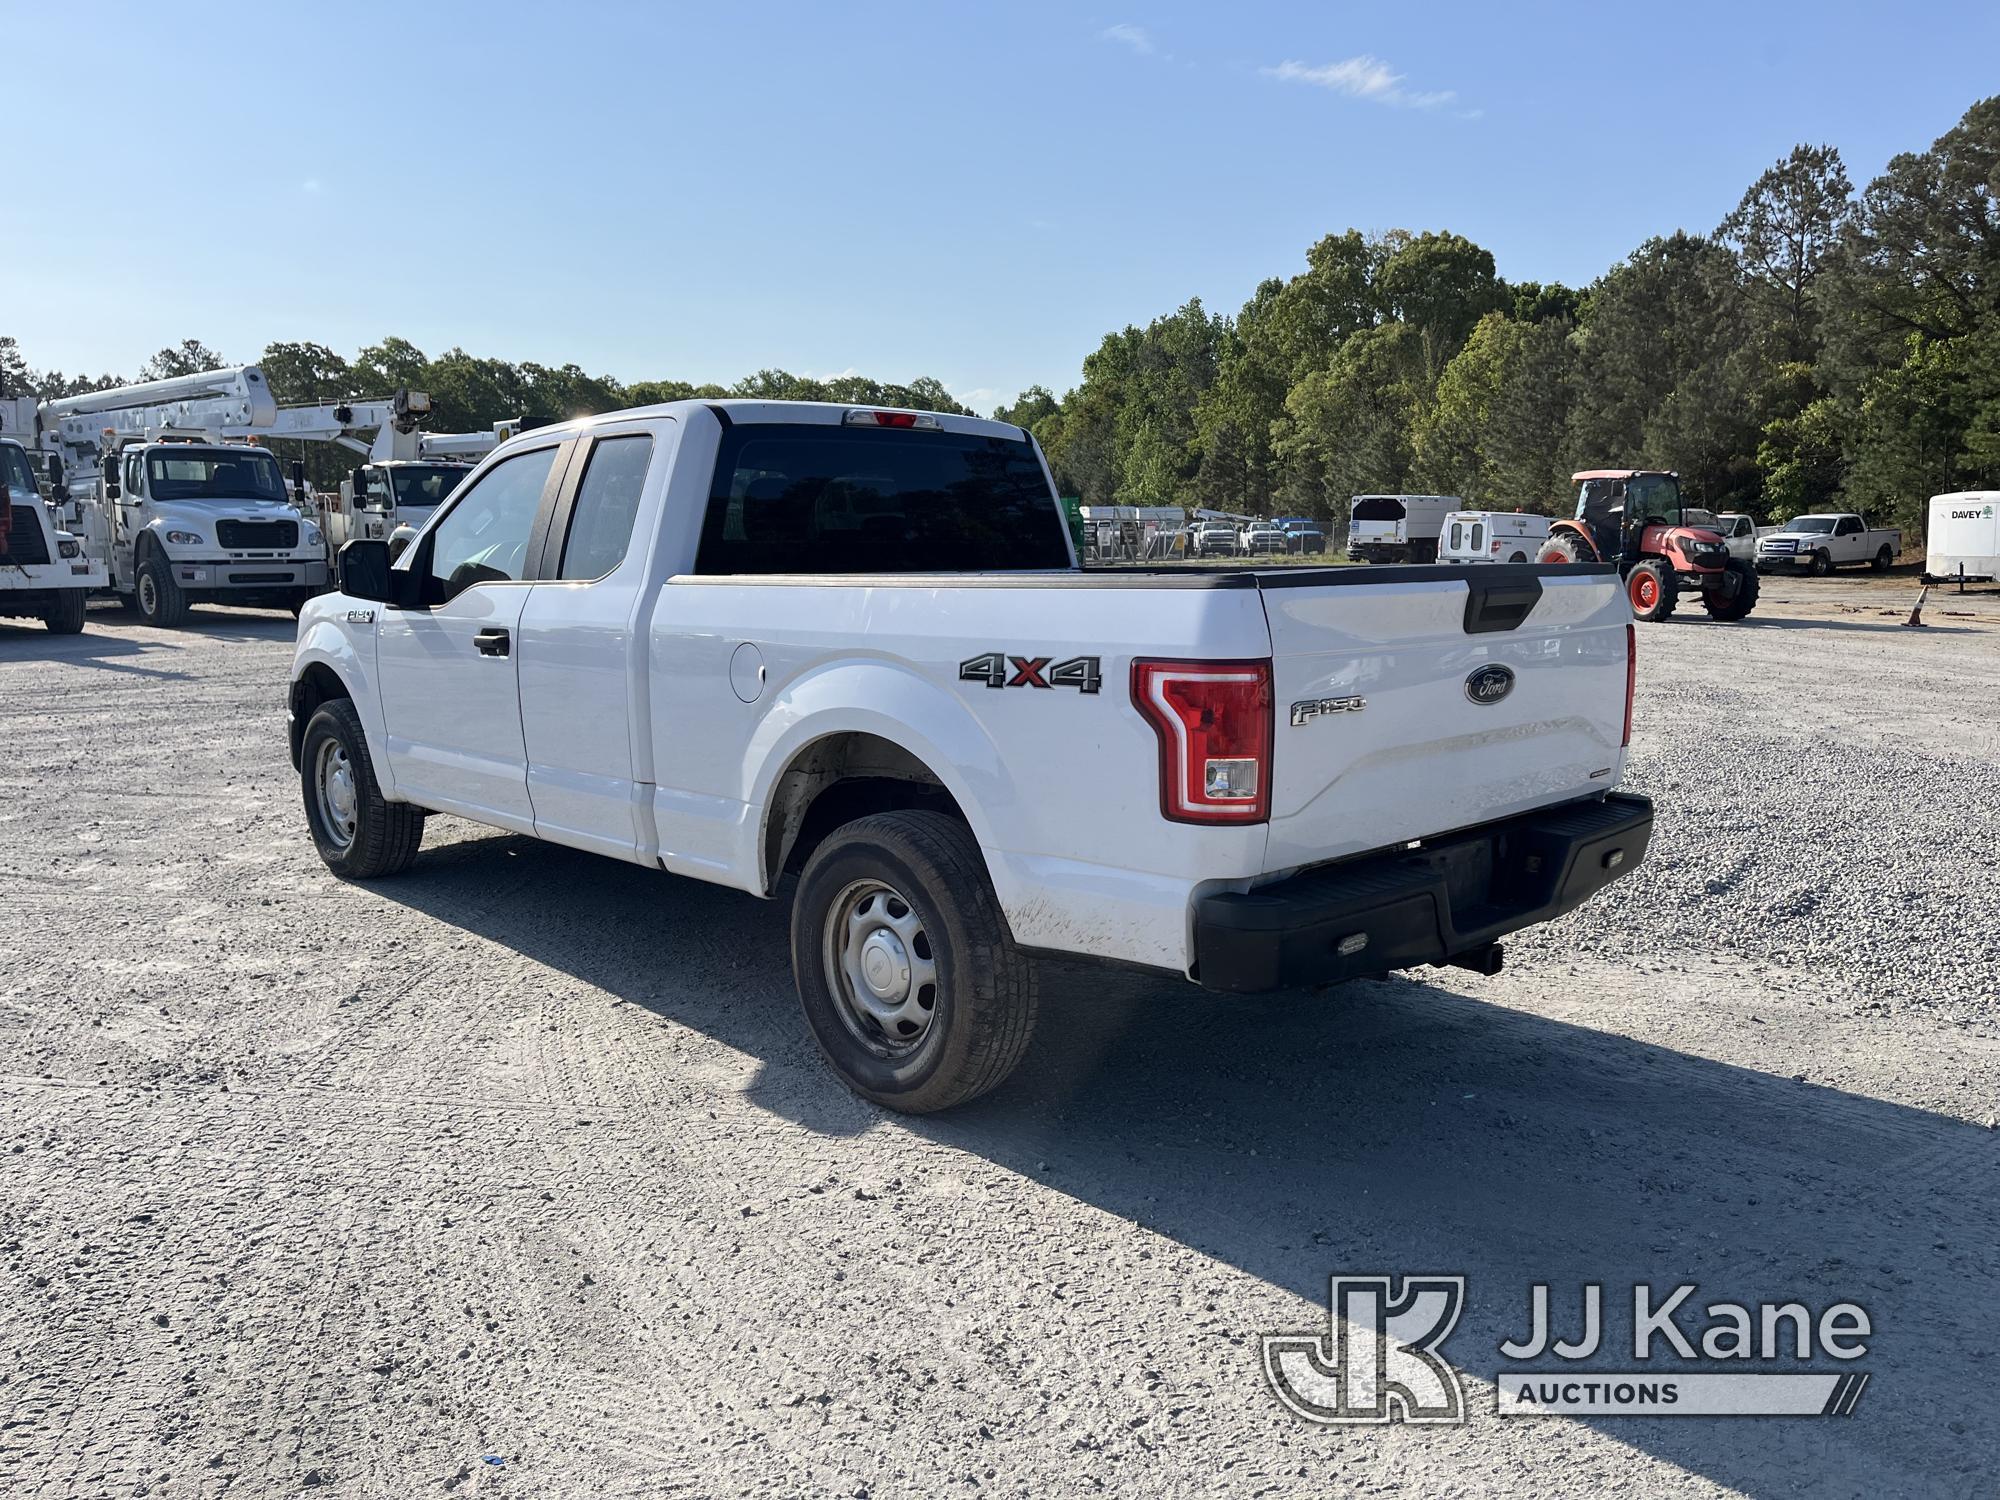 (Chester, VA) 2016 Ford F150 4x4 Extended-Cab Pickup Truck Runs & Moves) (Check Engine Light On